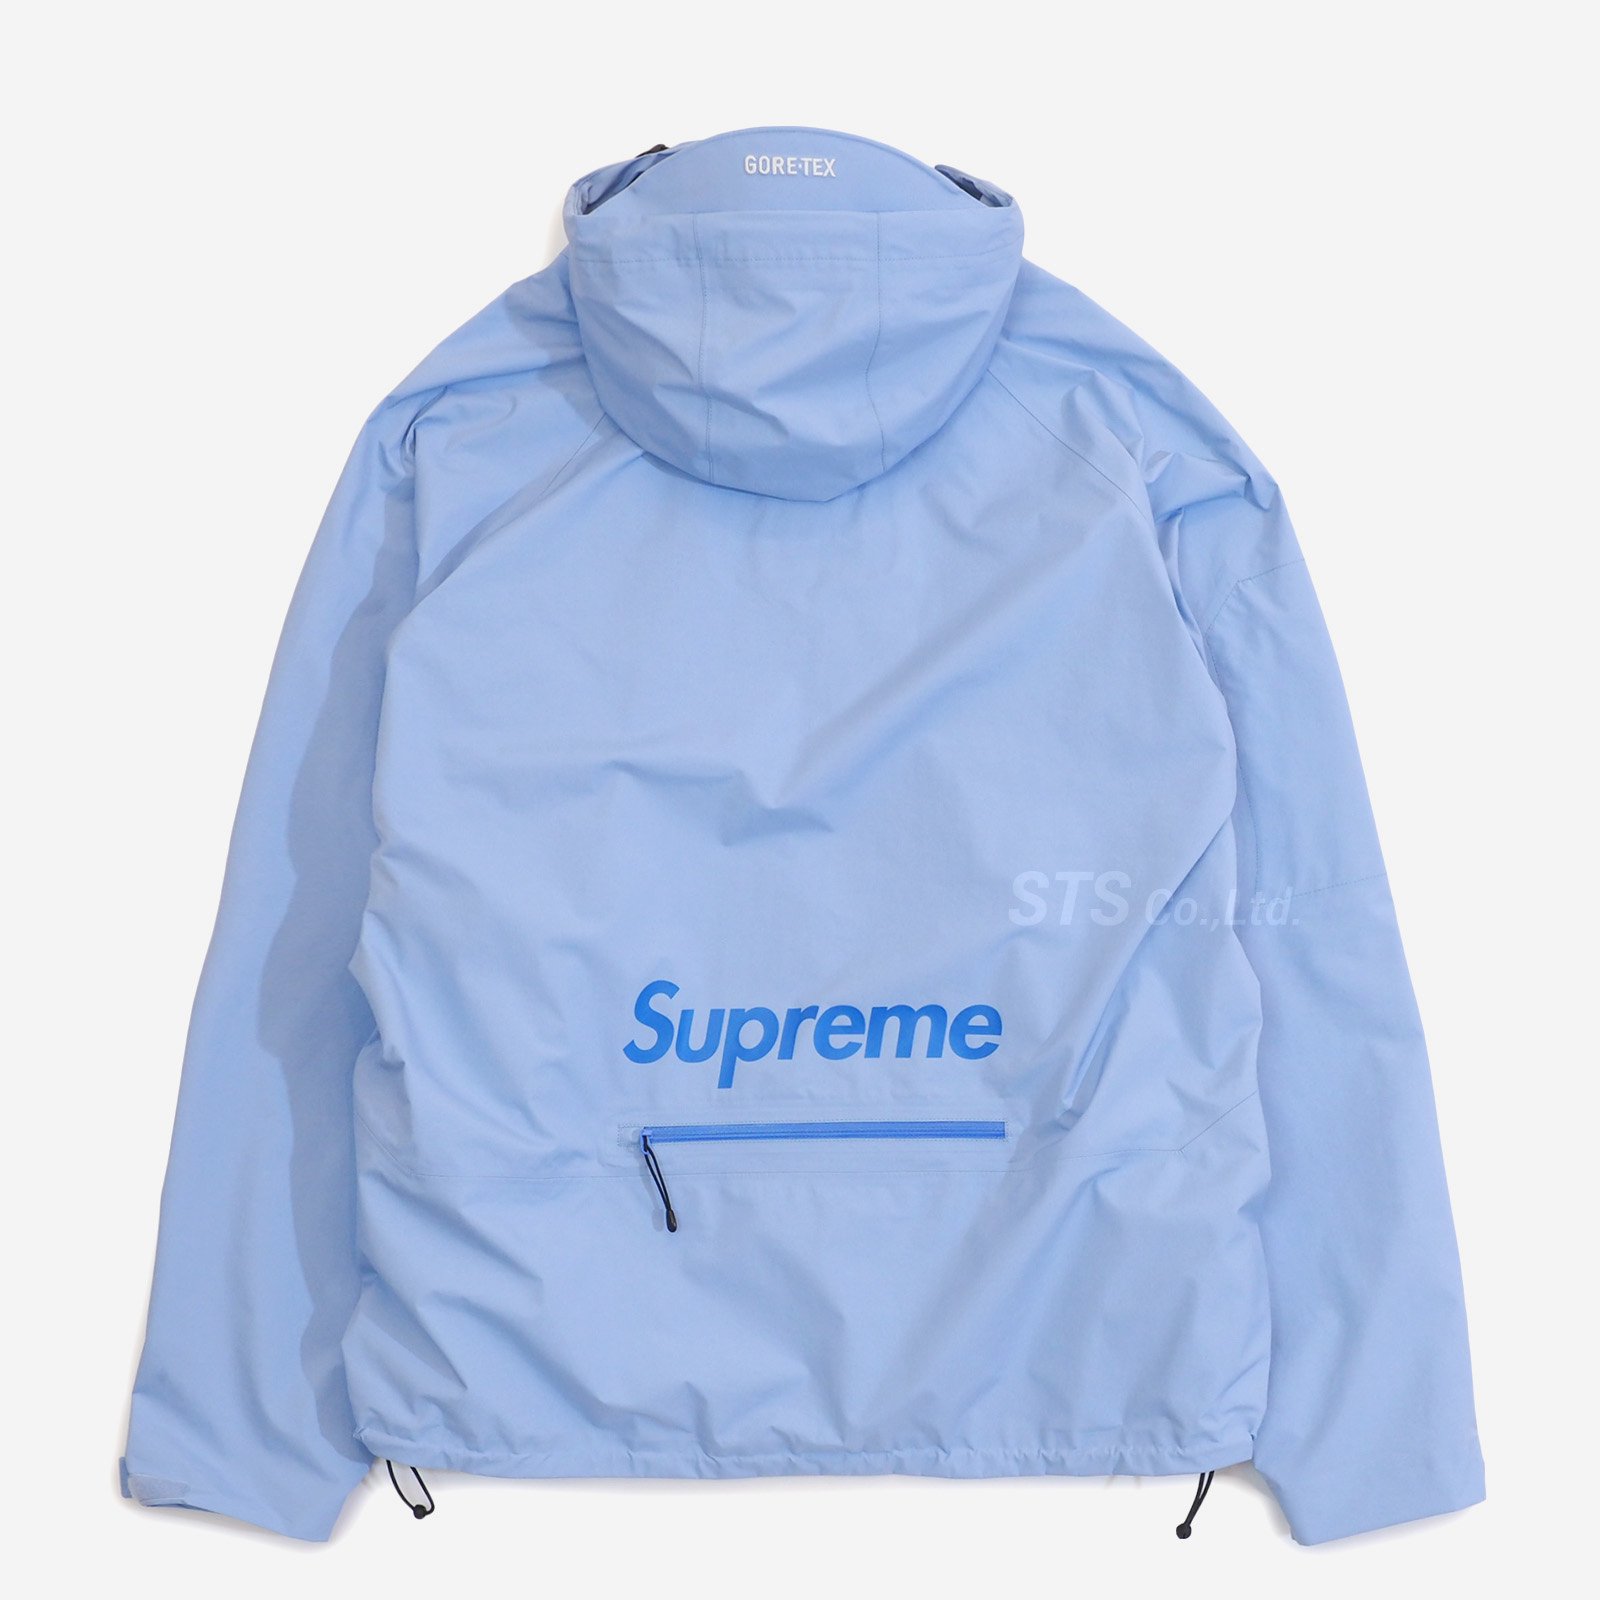 Supreme GORE-TEX Paclite Shell Jacket季節感春秋